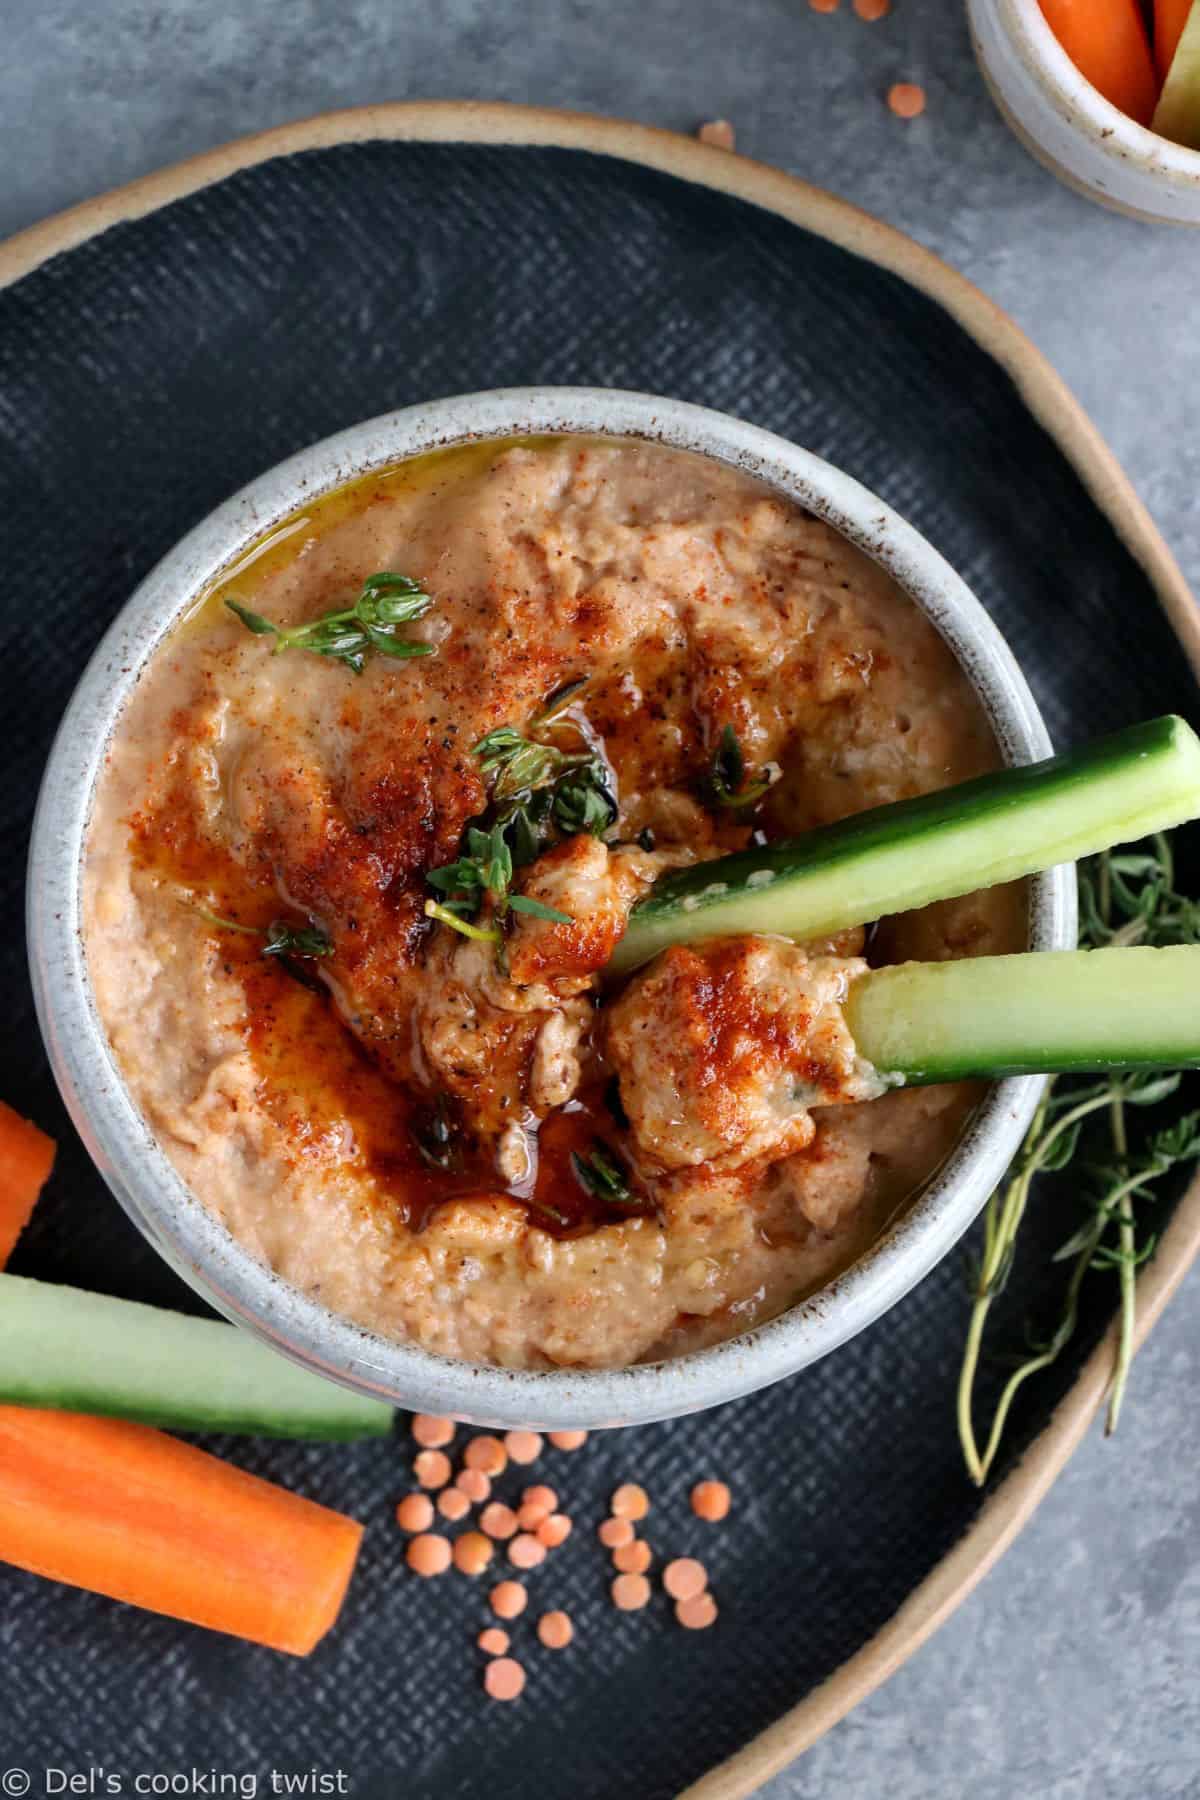 This smoky red lentil dip is quick, easy to prepare, with delicious smoky and spicy flavors.